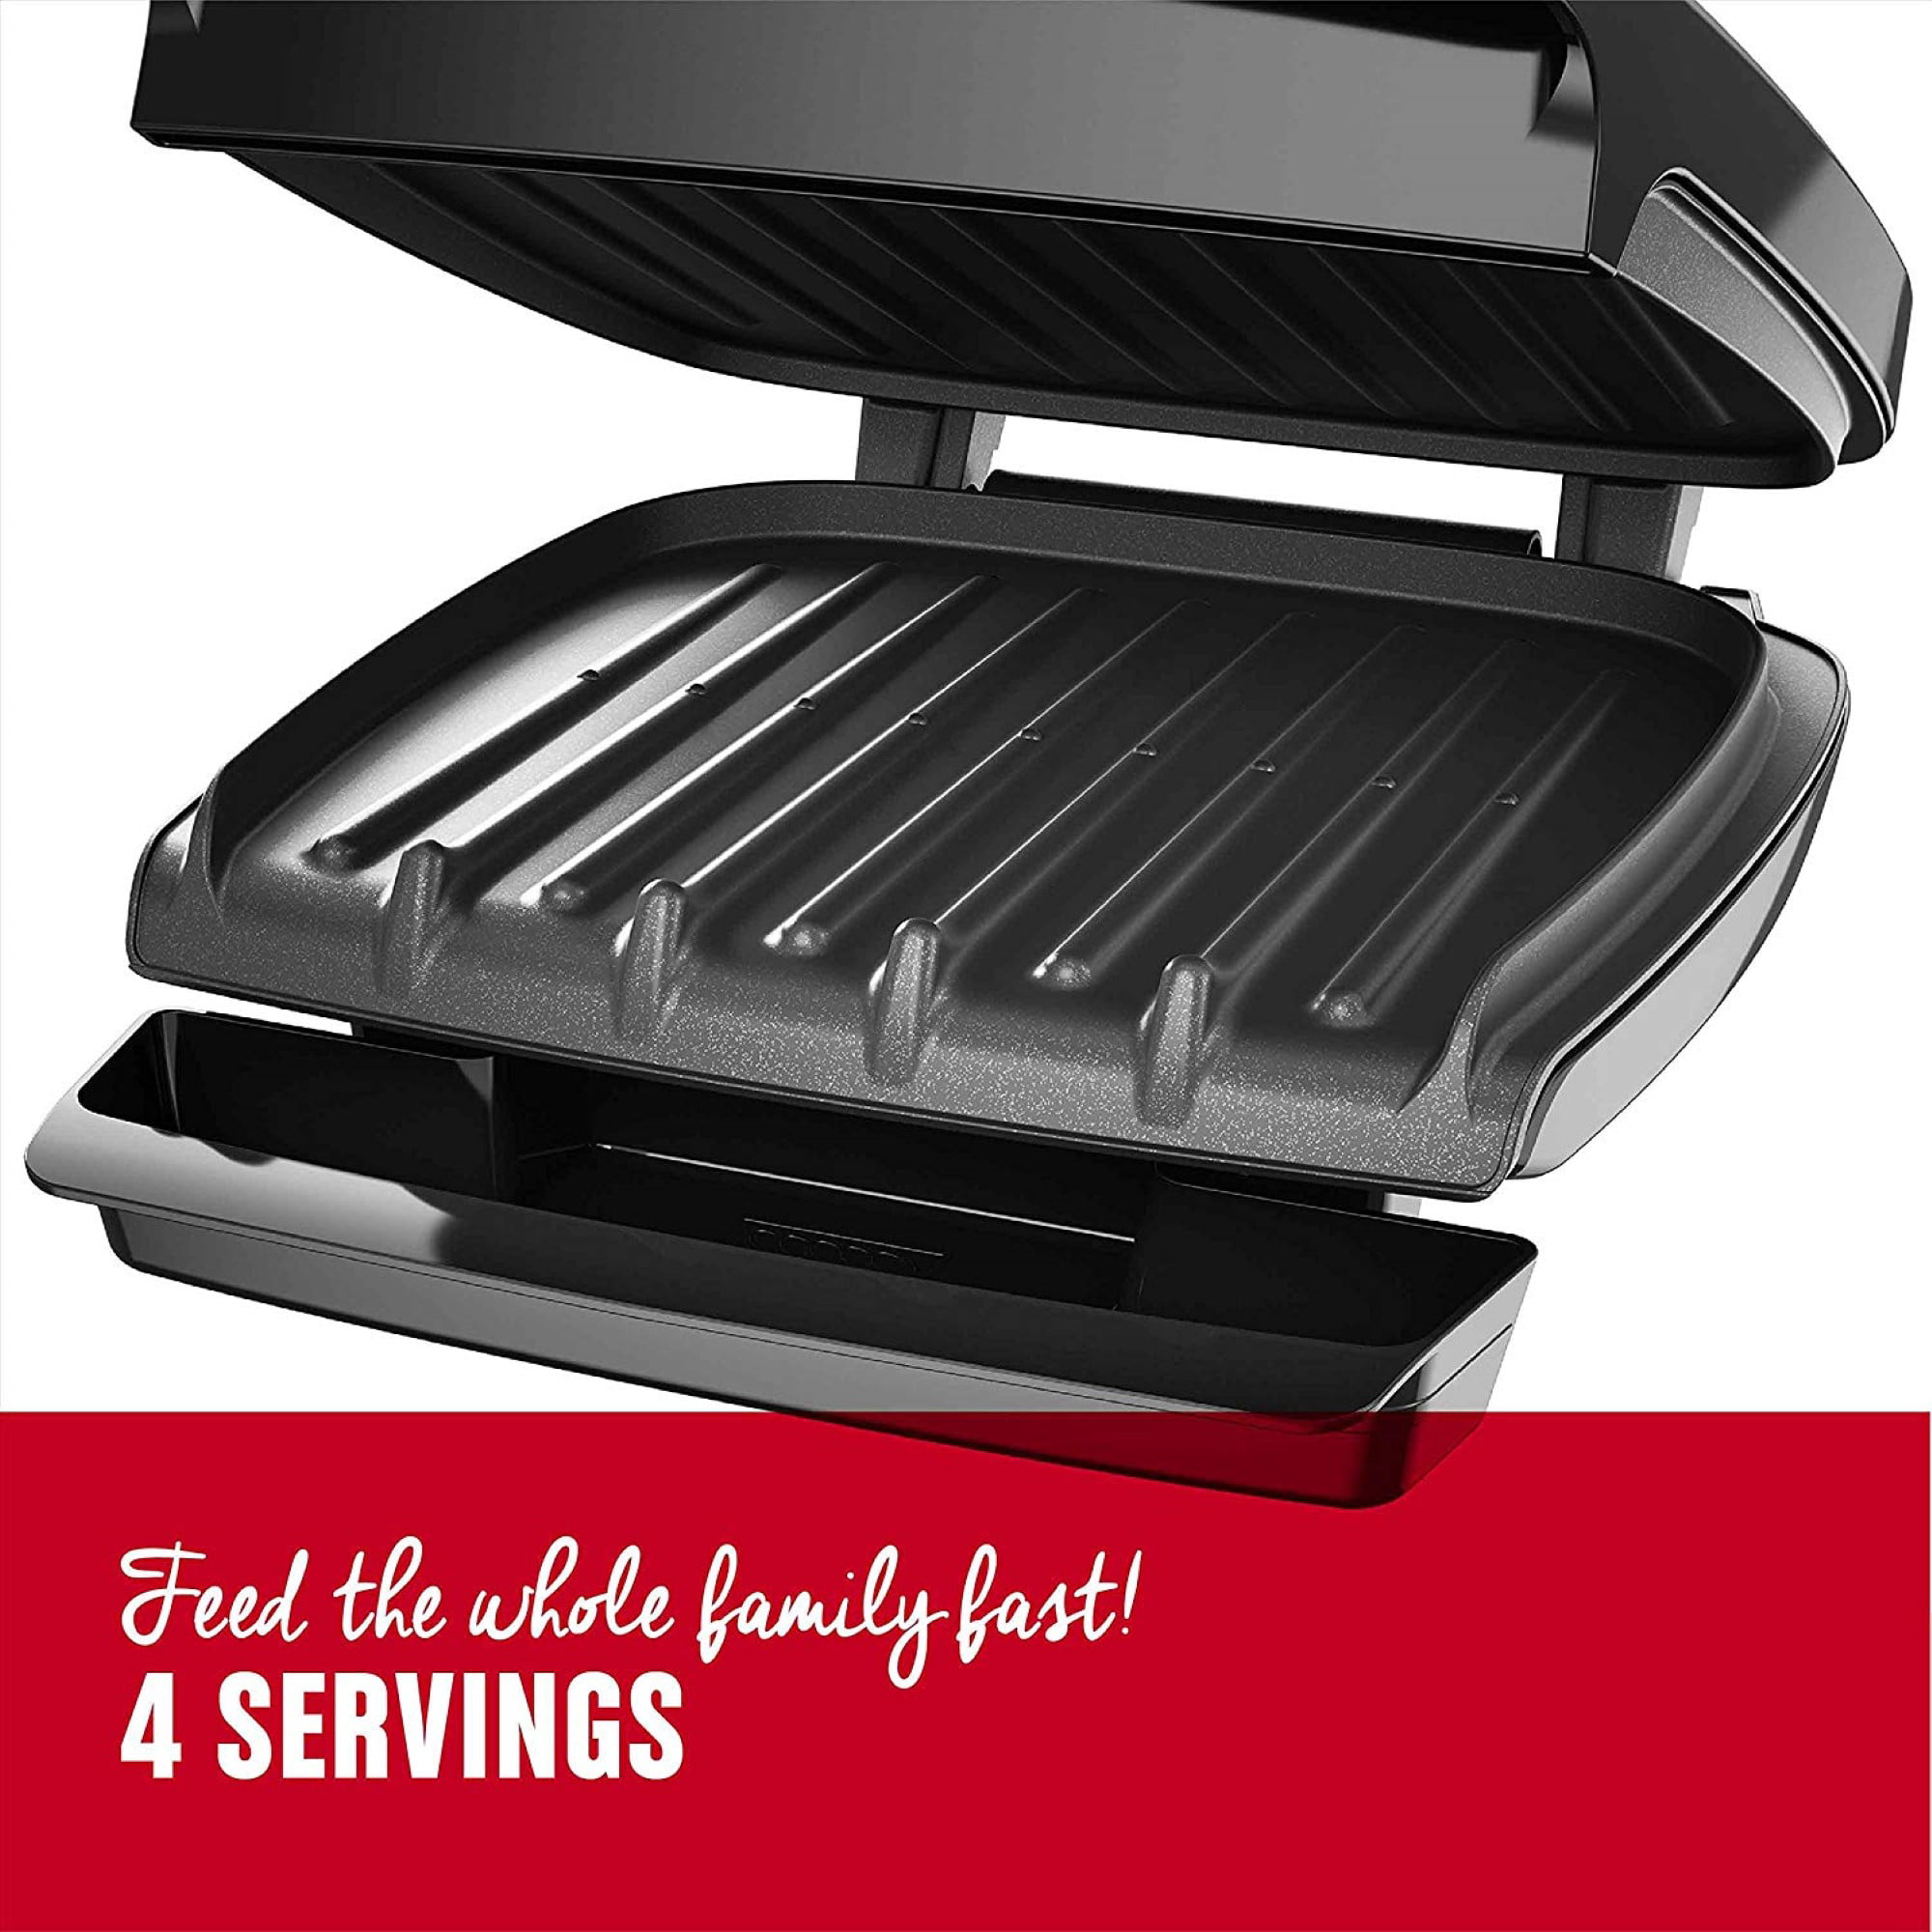 Health and Home 4-Serving Classic Plate Grill and Pannini Press Black